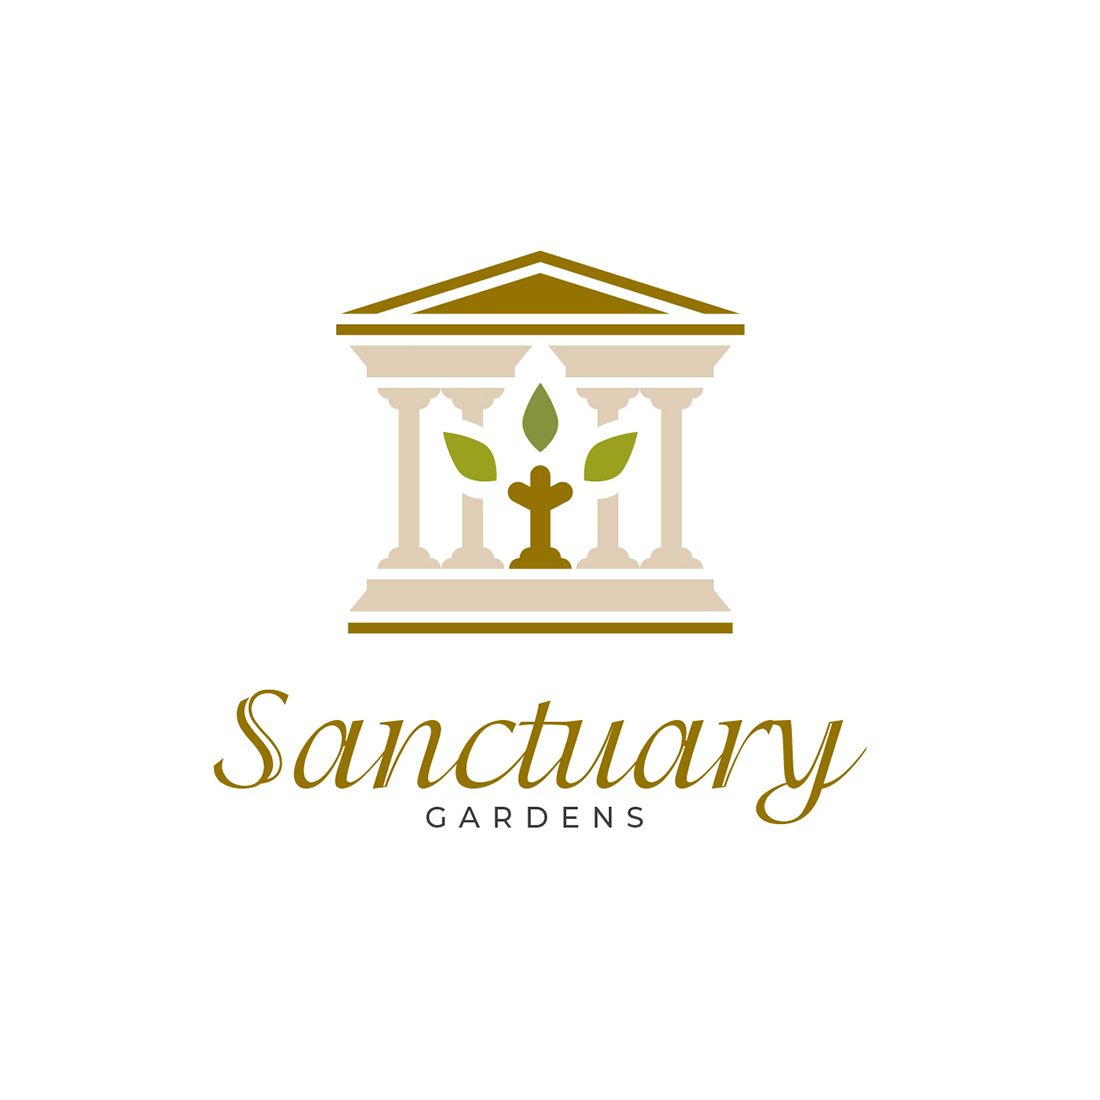 Sanctuary Gardens Third Concept created by memoamyGD.